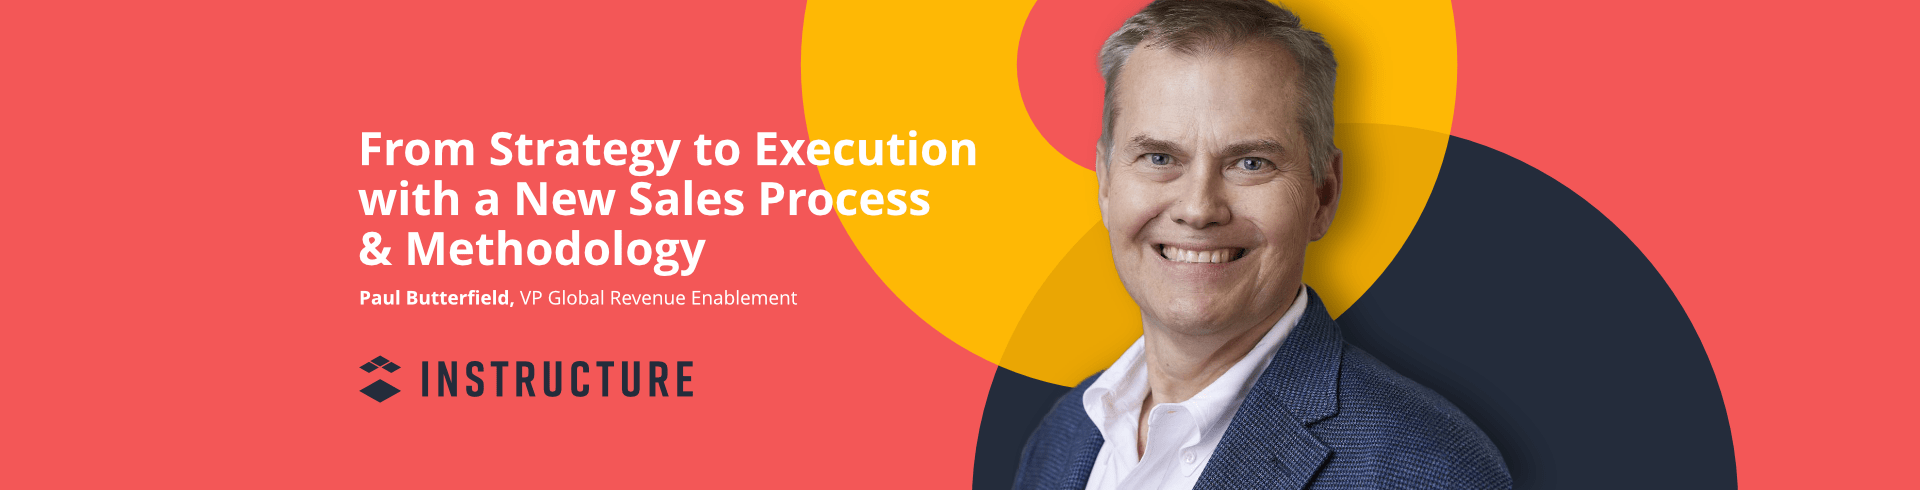 From Strategy To Execution With A New Sales Process | Saleshood